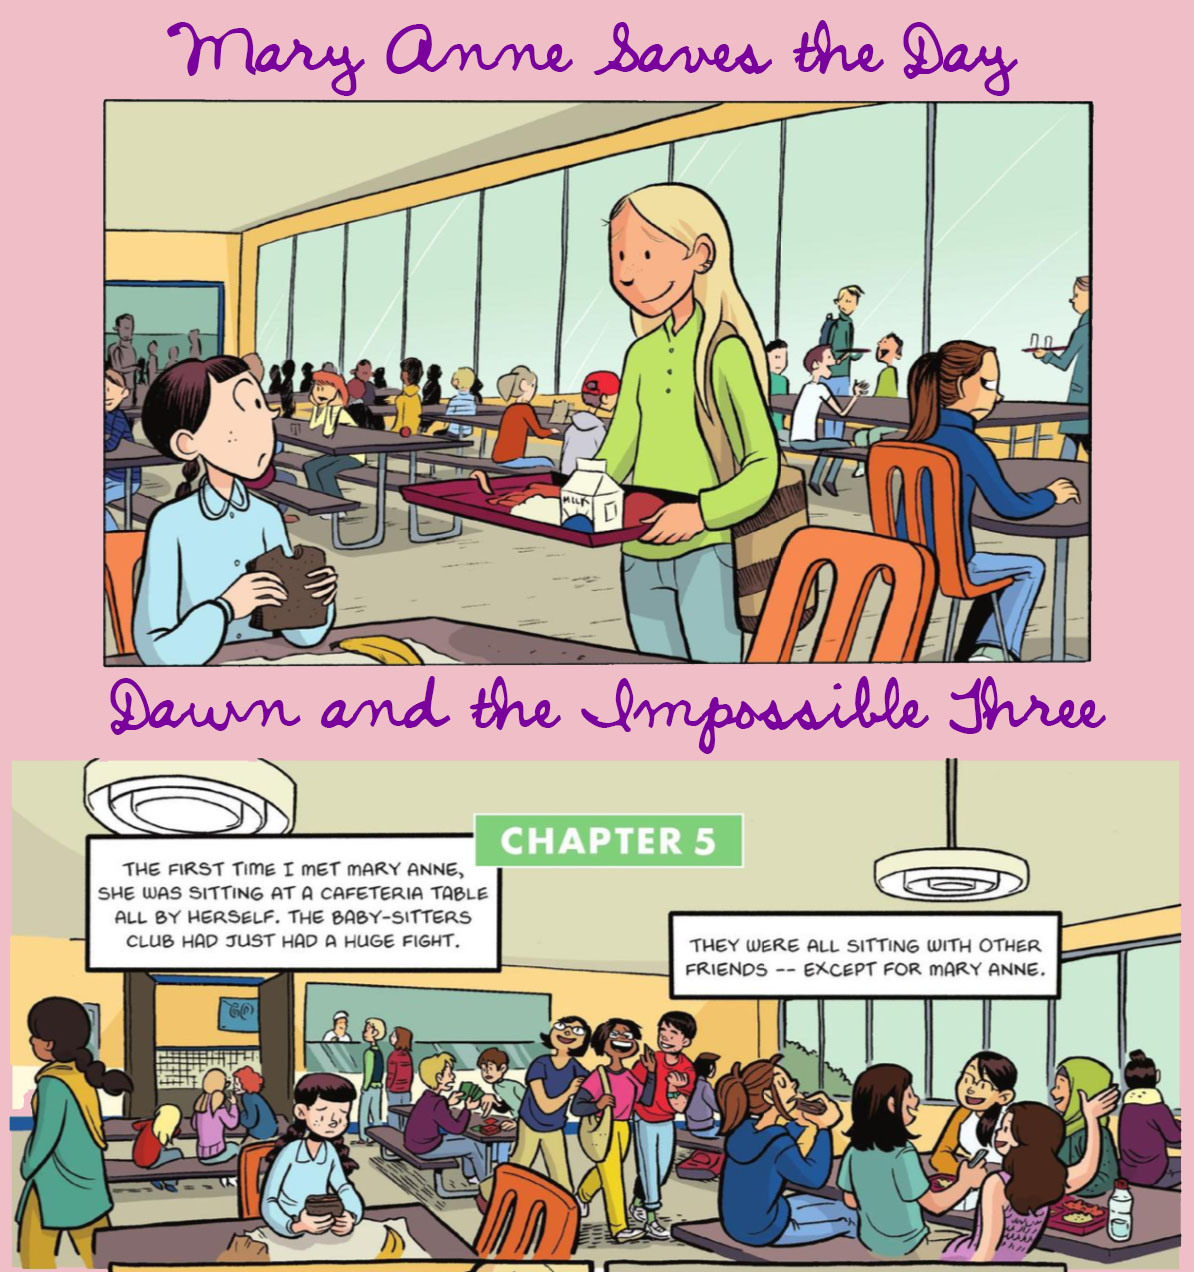 Comparison of cafeteria scenes from Mary Anne Saves the Day and Dawn and the Impossible Three